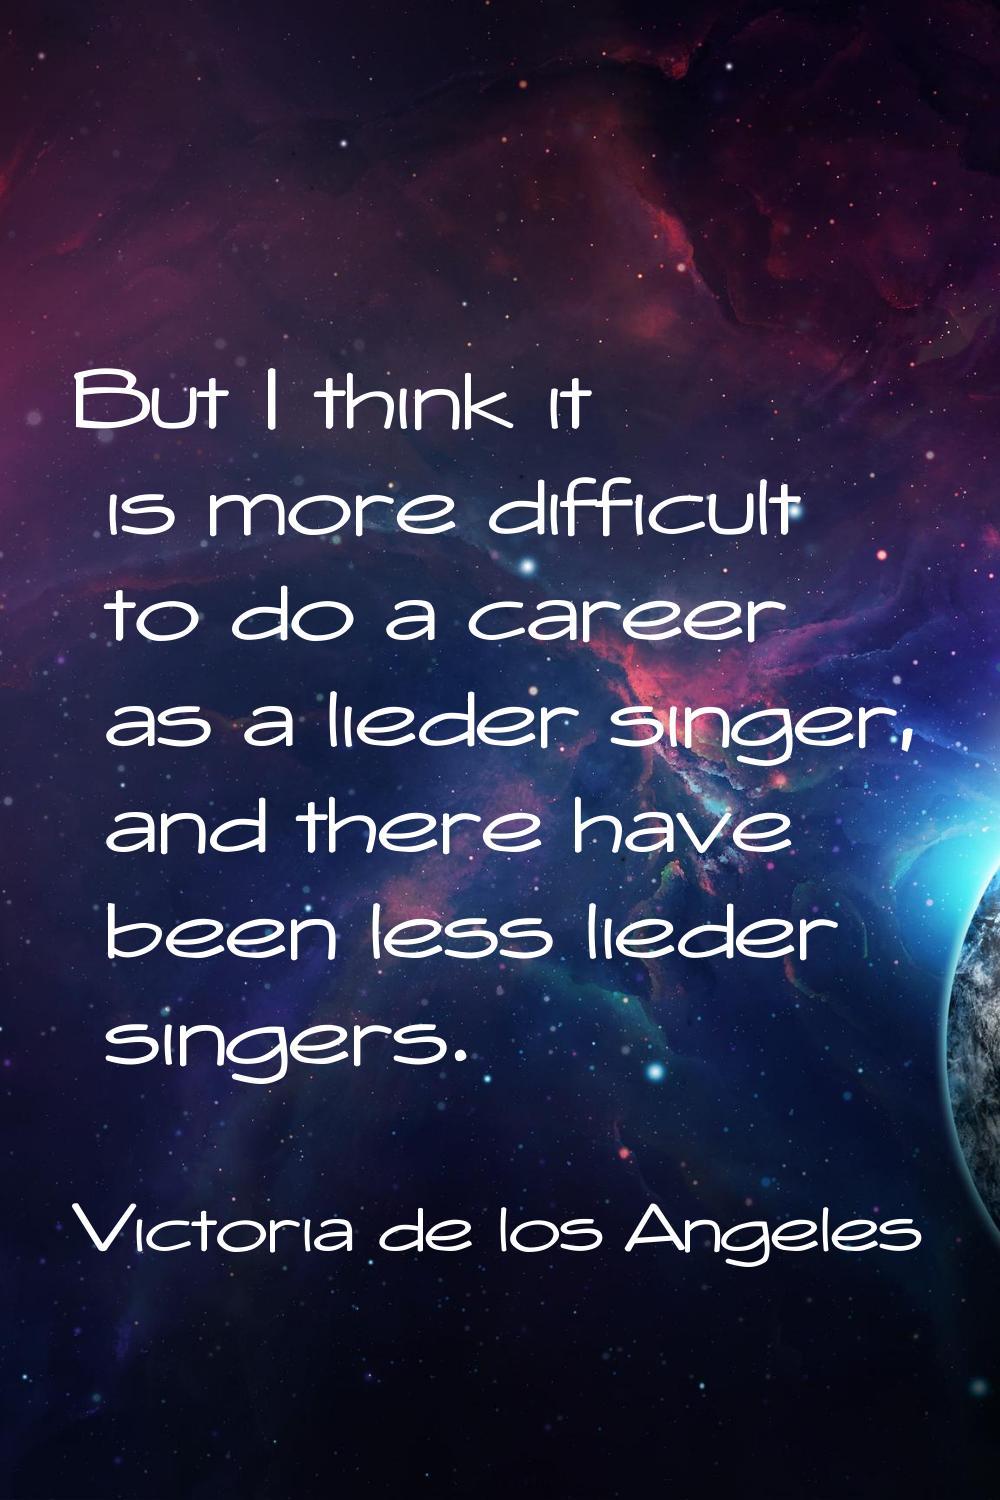 But I think it is more difficult to do a career as a lieder singer, and there have been less lieder